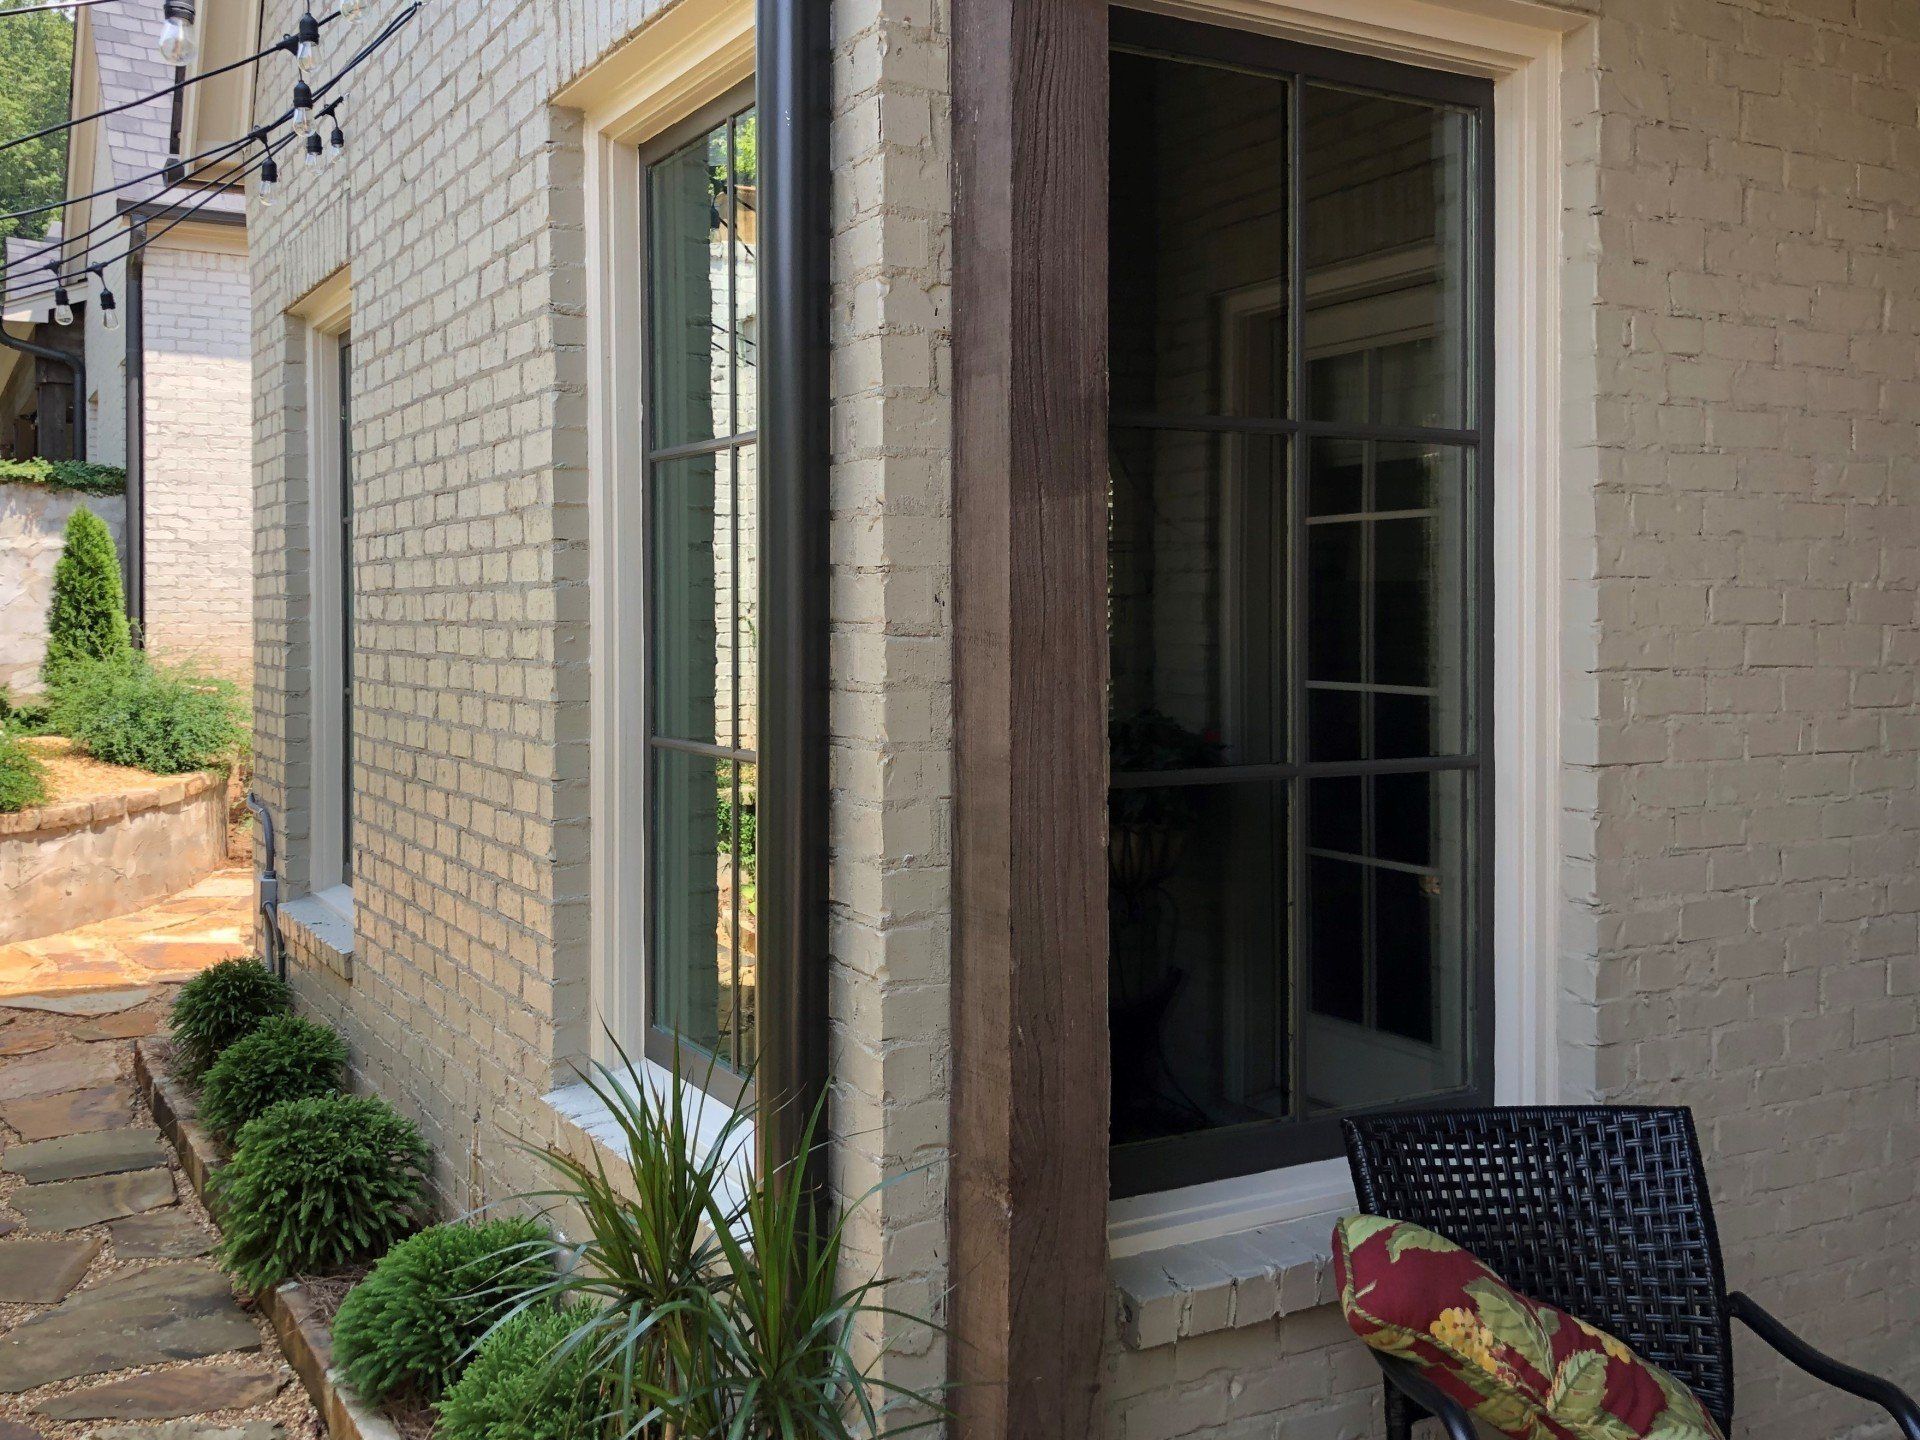 home window tinting service in Birmingham AL - The new style really pops with this top SPF Performance Home Tint option. Incredibly 85% heat gain has now been rejected from this home in Birmingham, AL